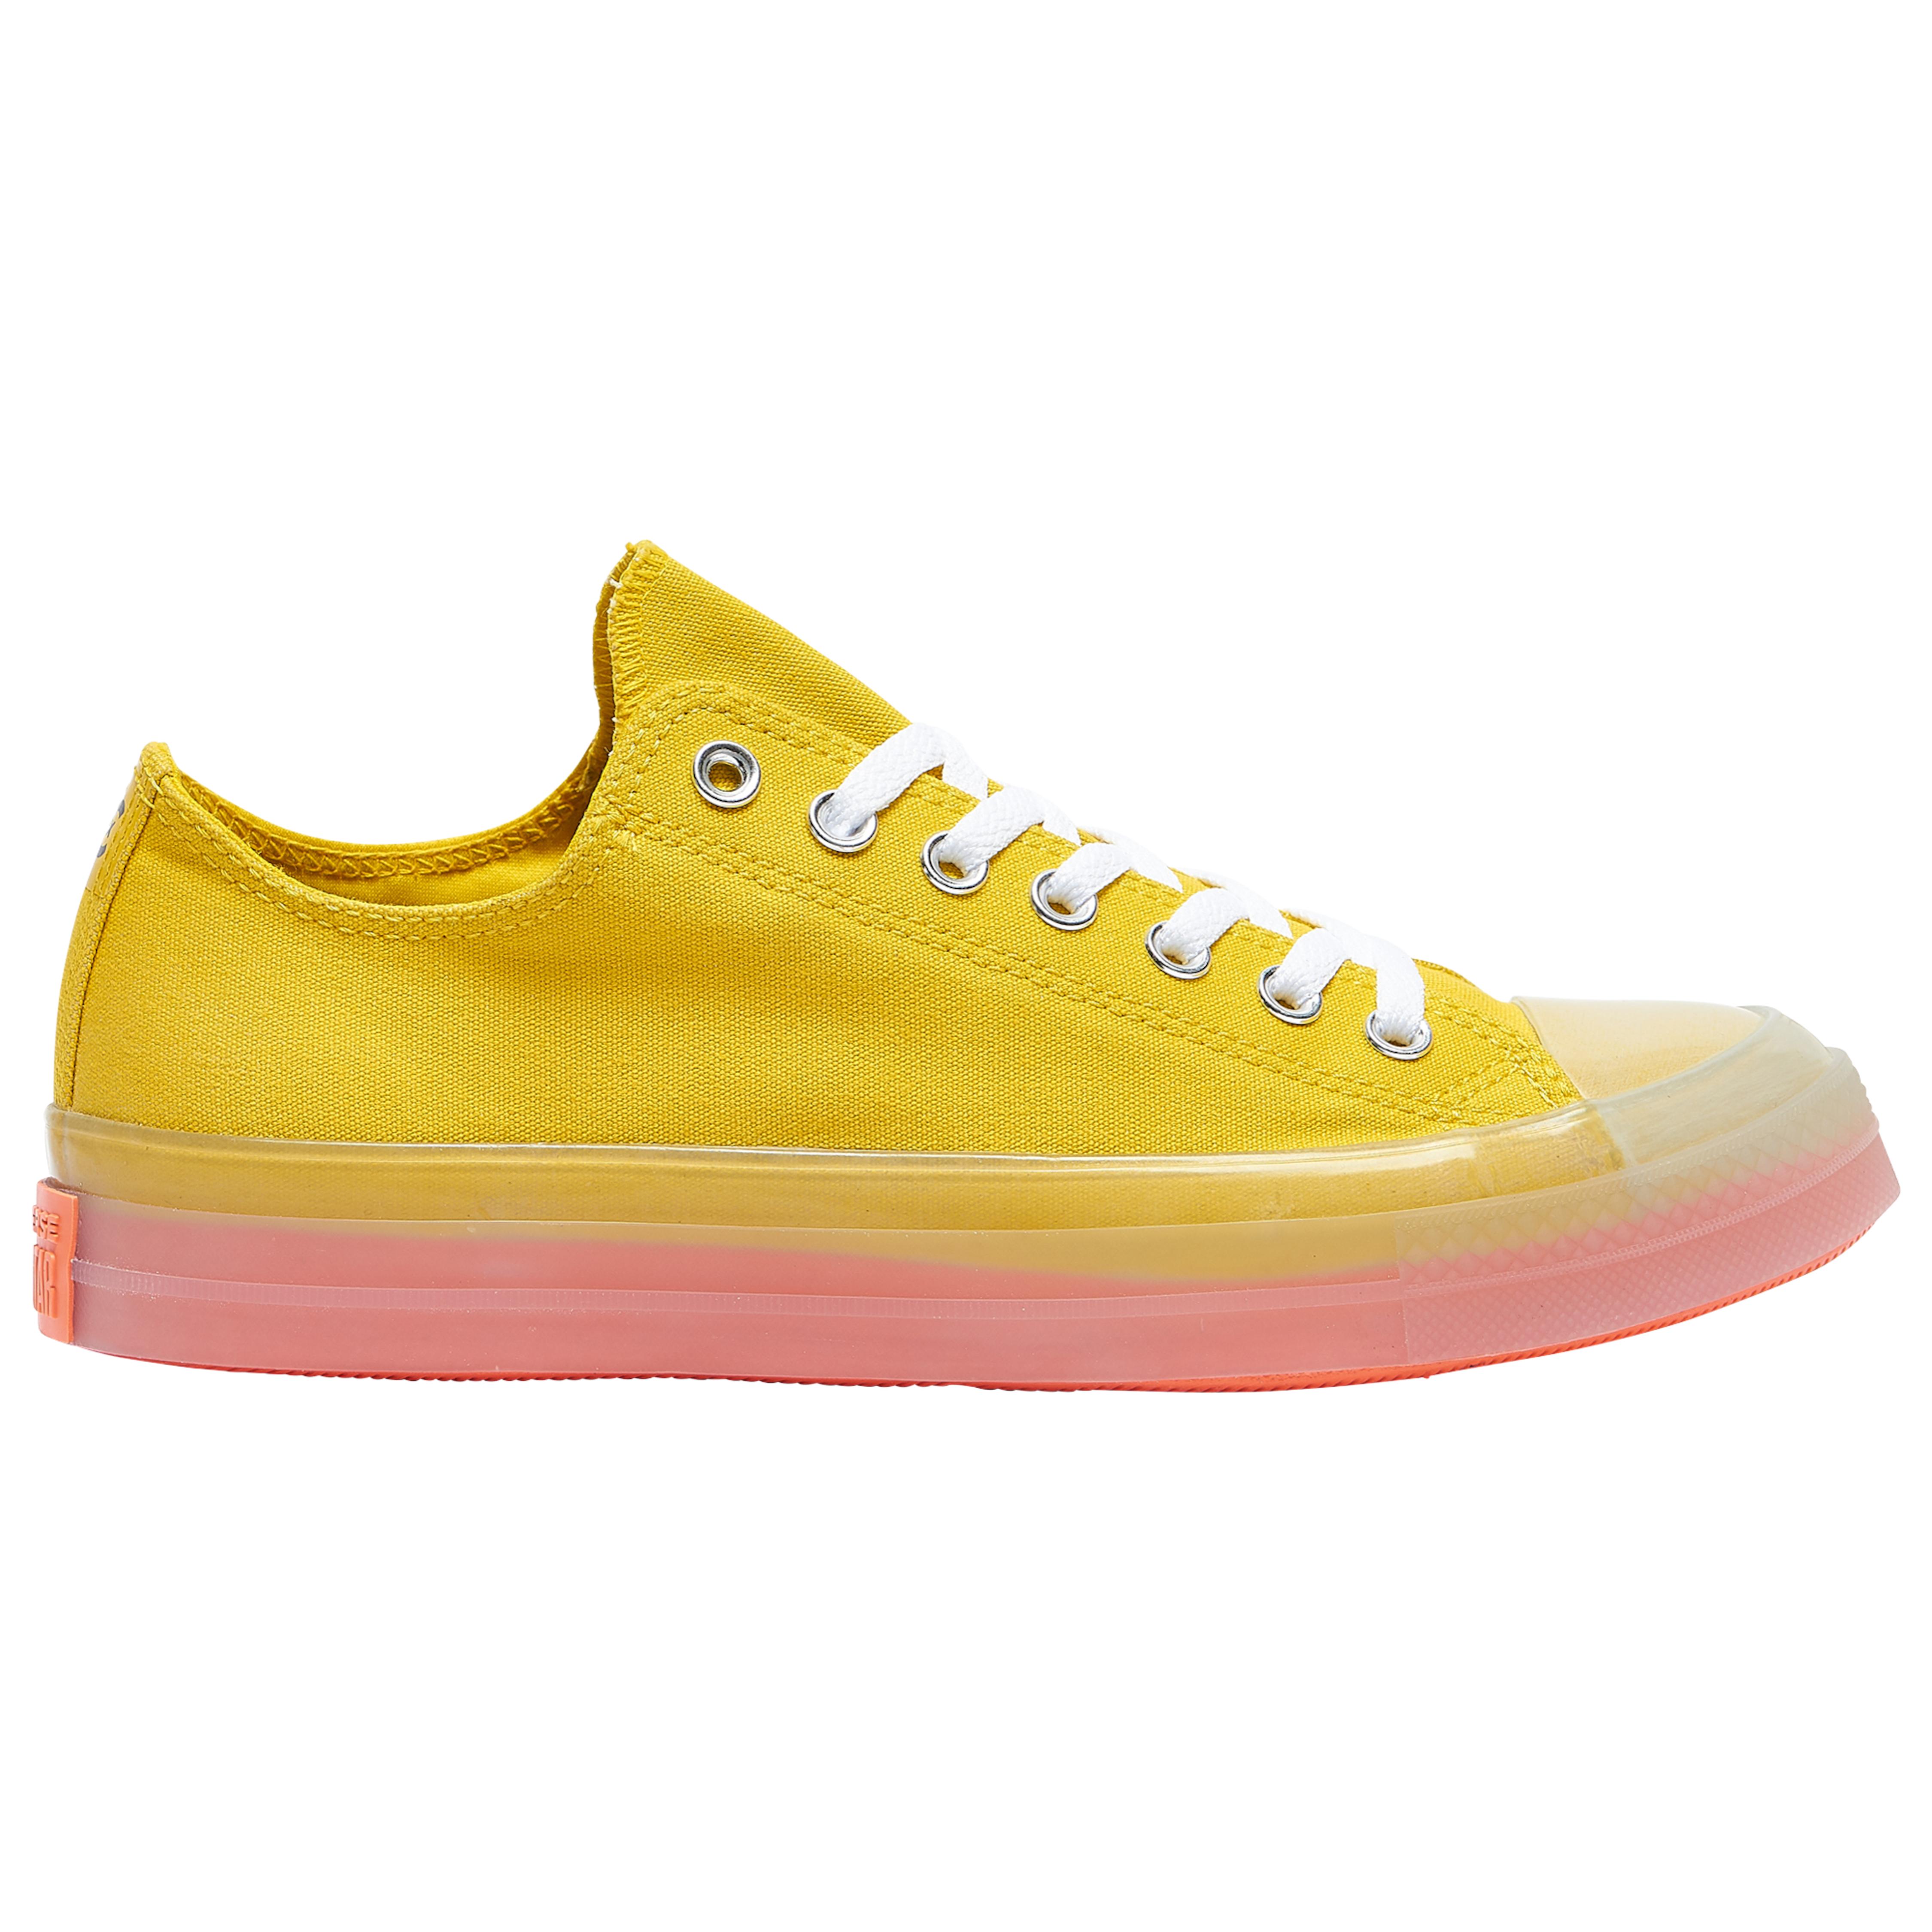 Converse Canvas All Star Cx Ox in Yellow for Men - Lyst